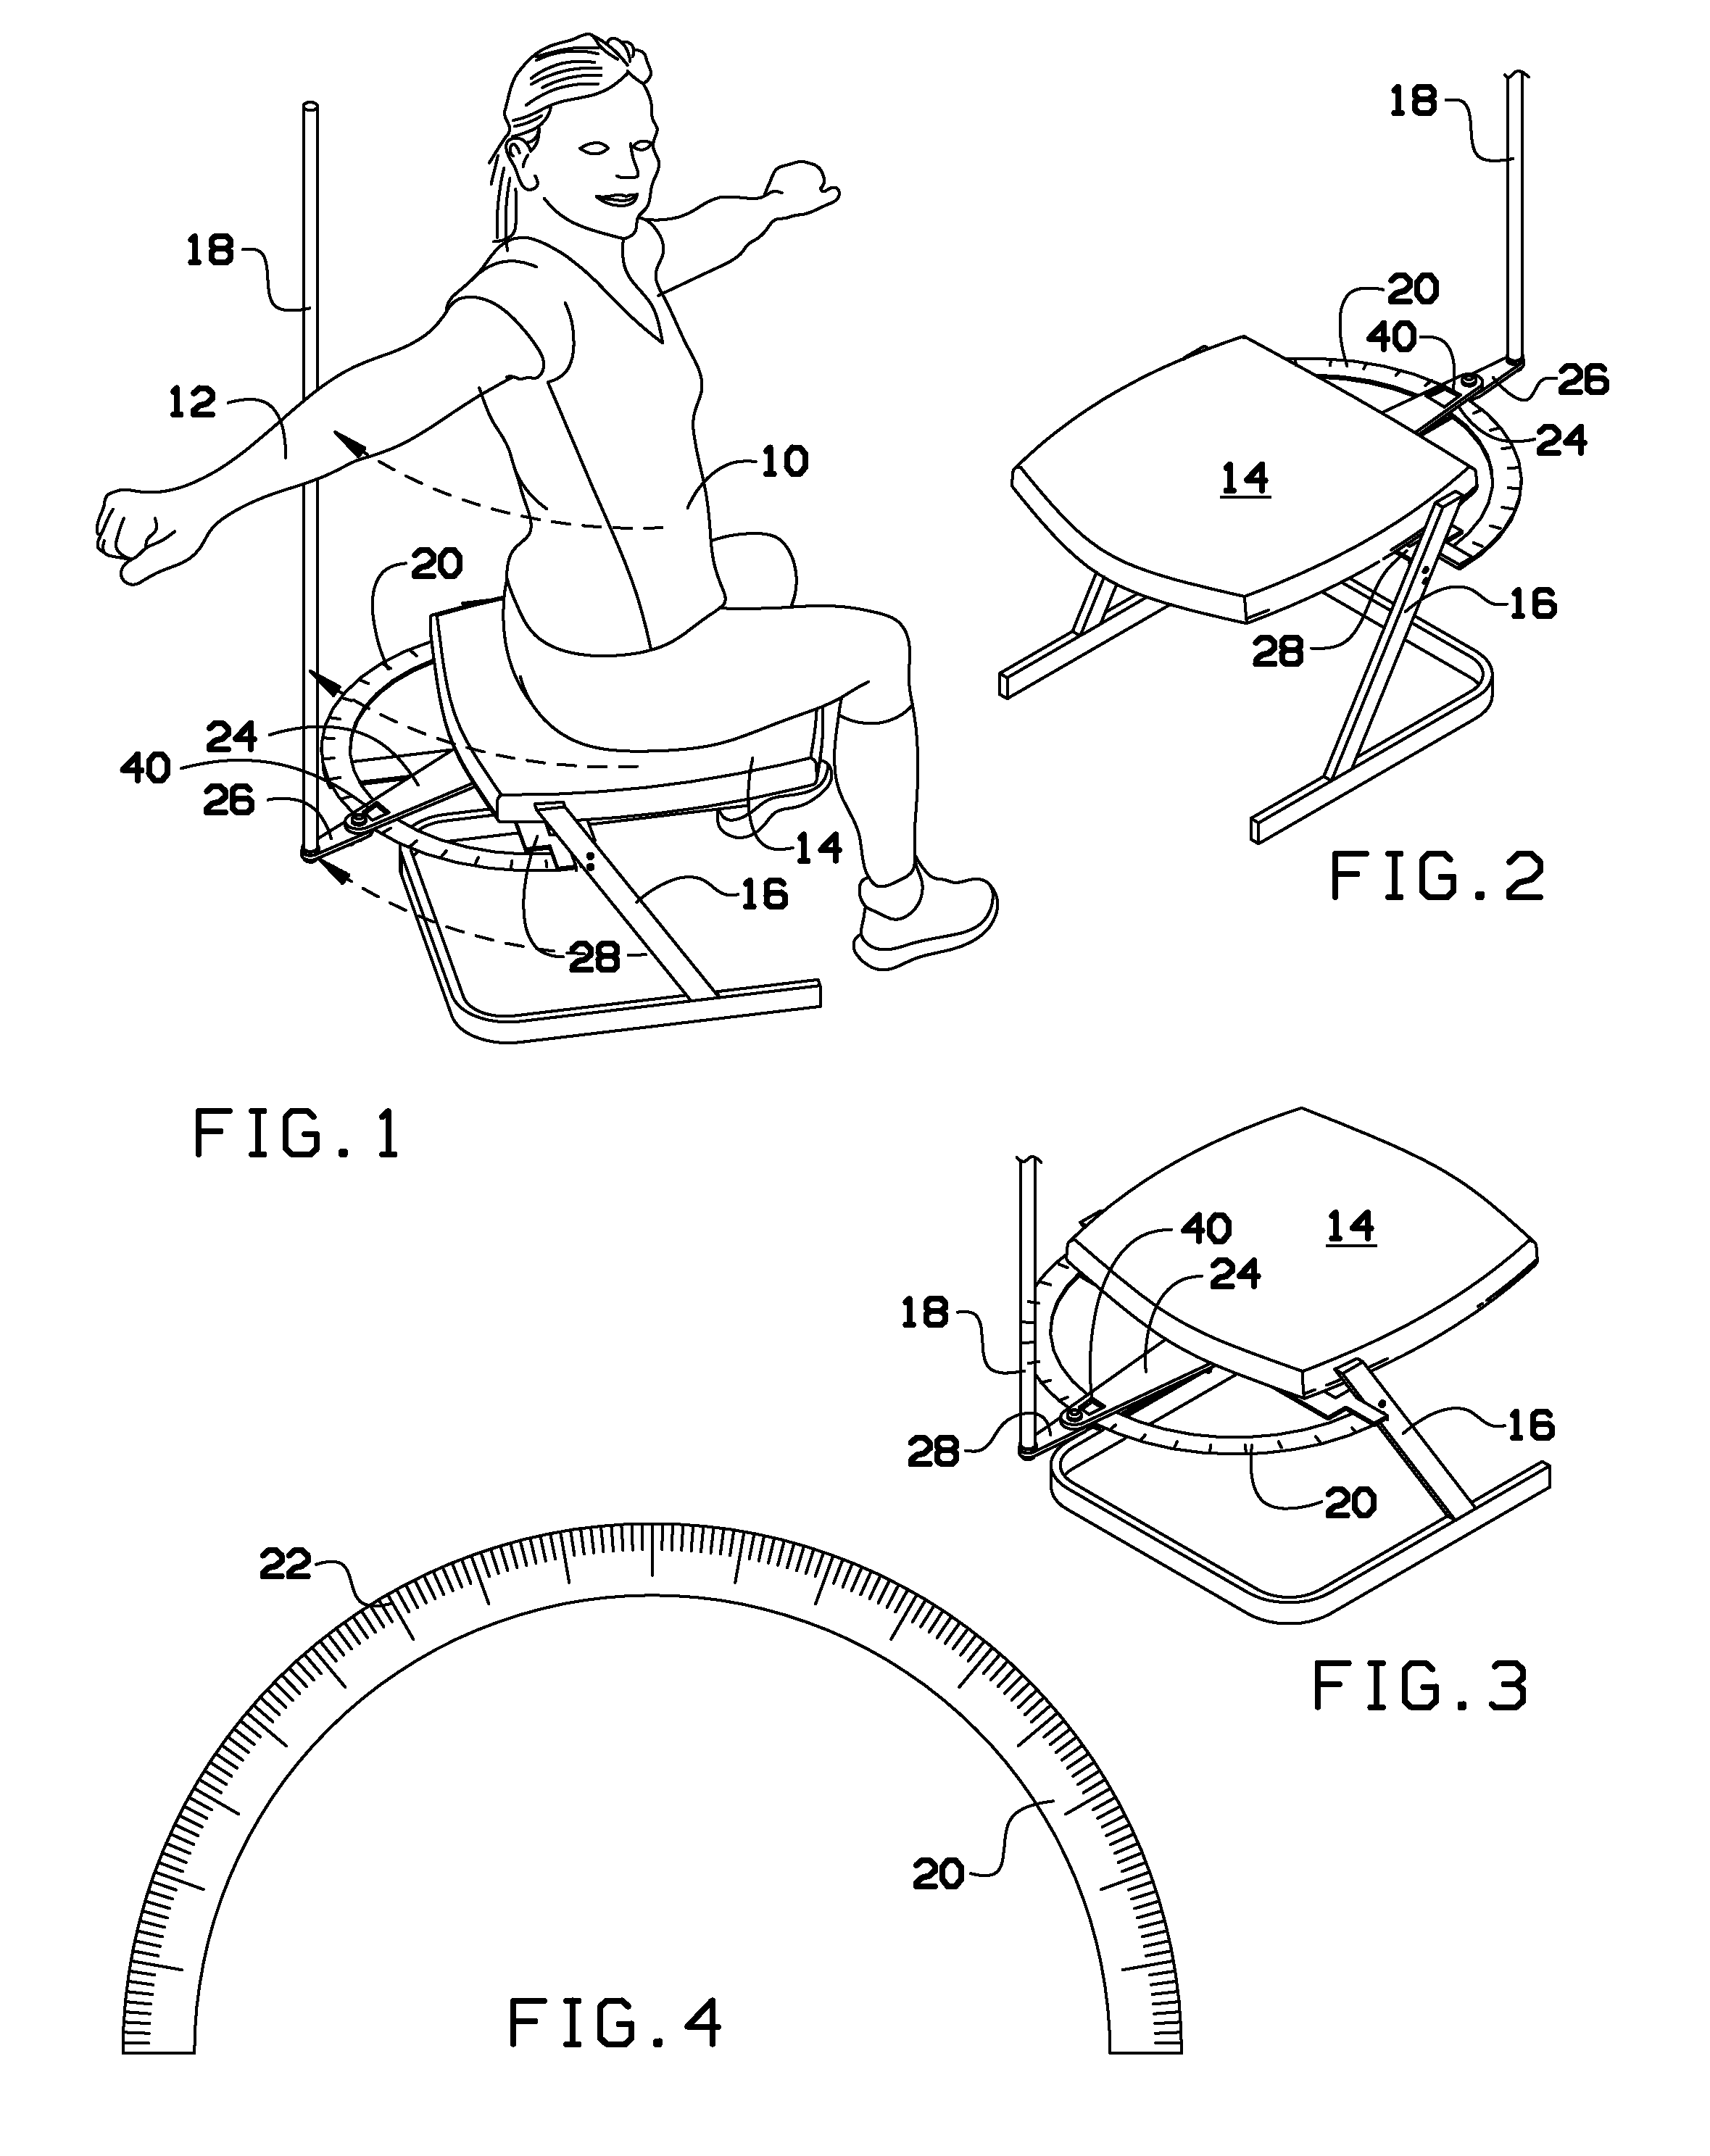 Device for measuring a person's trunk rotation from a seated position